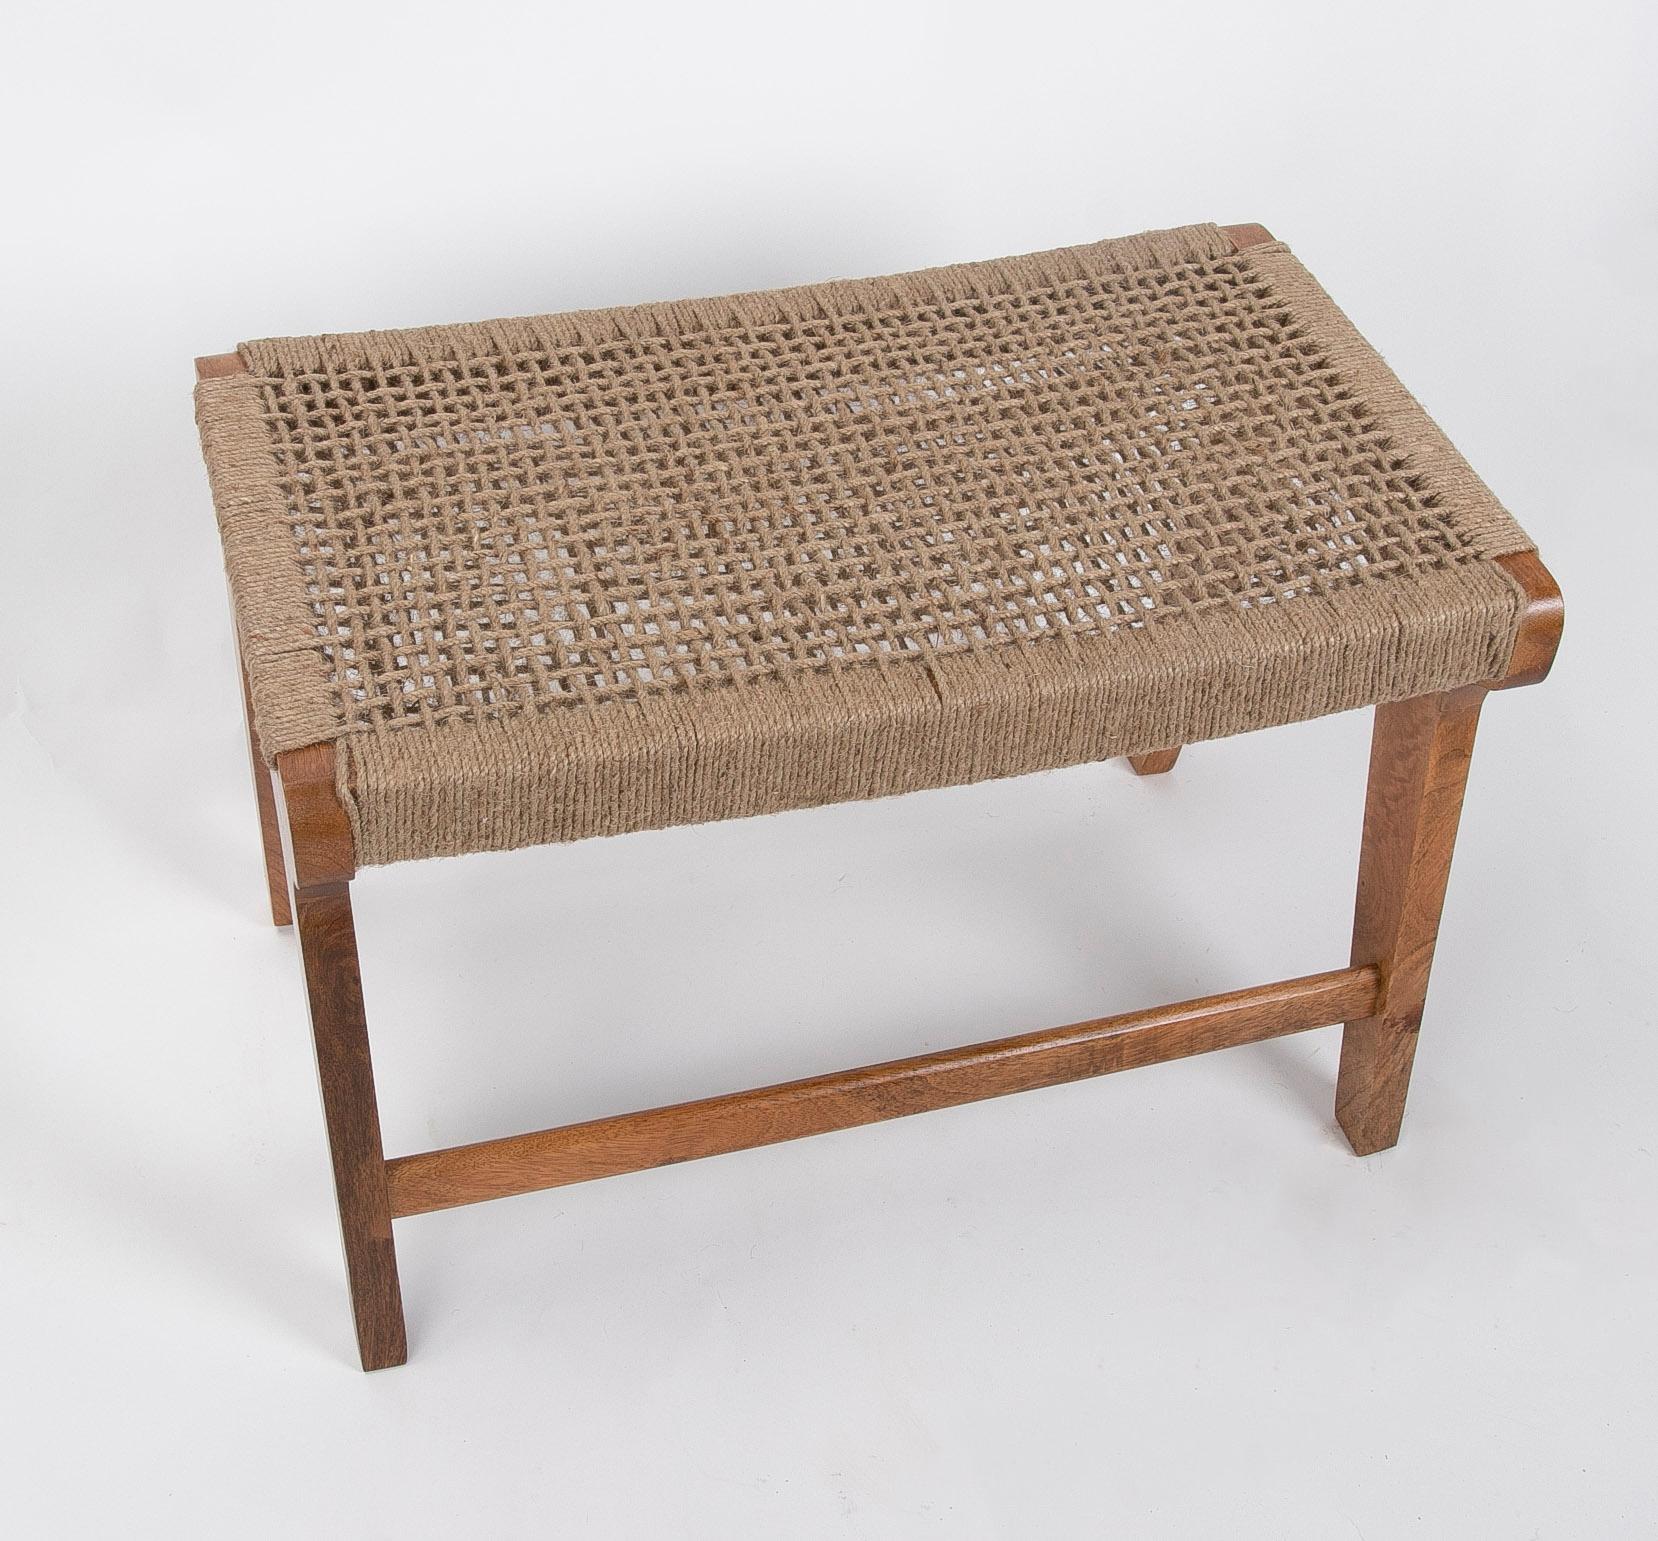 Wooden Stool with Hand-Braided Rope Seat For Sale 1